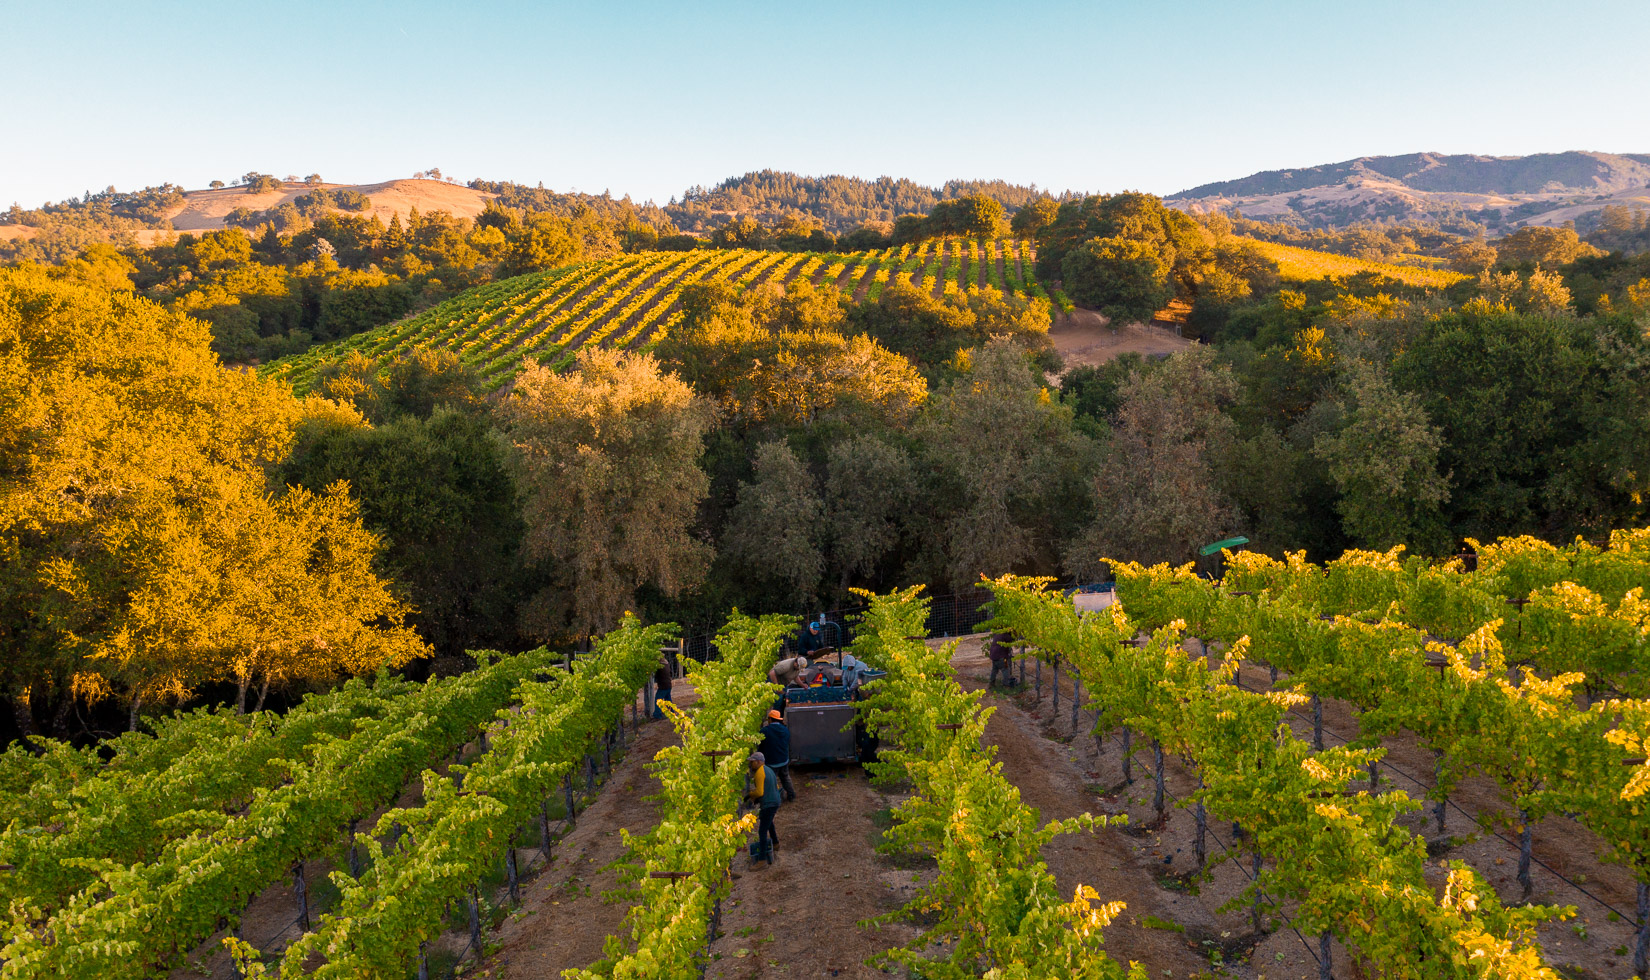 Rows of vineyards at sunset with grape harvesters and a tractor. In the background are rolling hills of golden vineyards and oak trees.